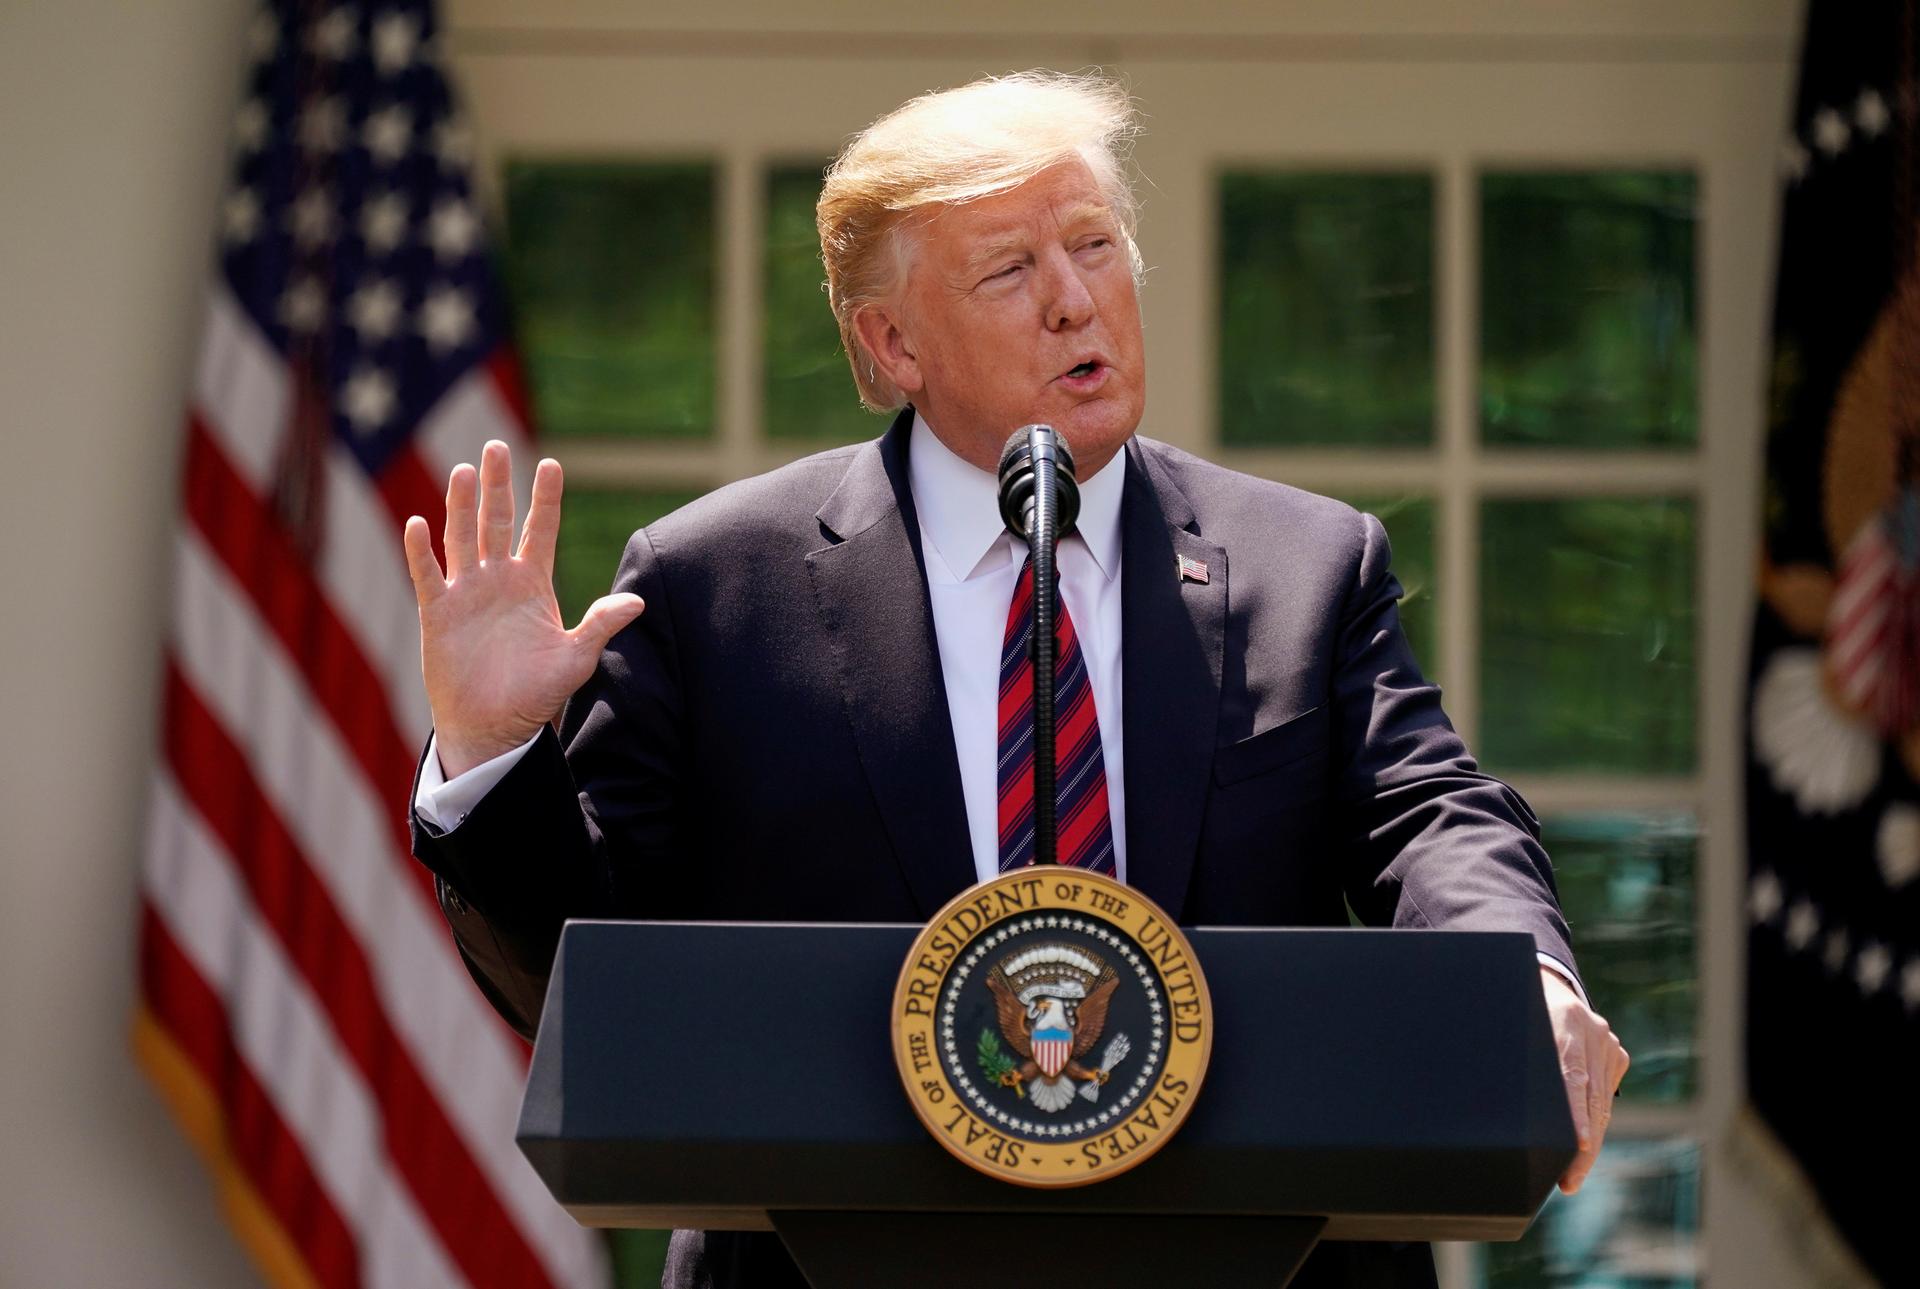 US President Donald Trump delivers remarks on immigration reform at a podium in the Rose Garden of the White House in Washington, DC, May 16, 2019